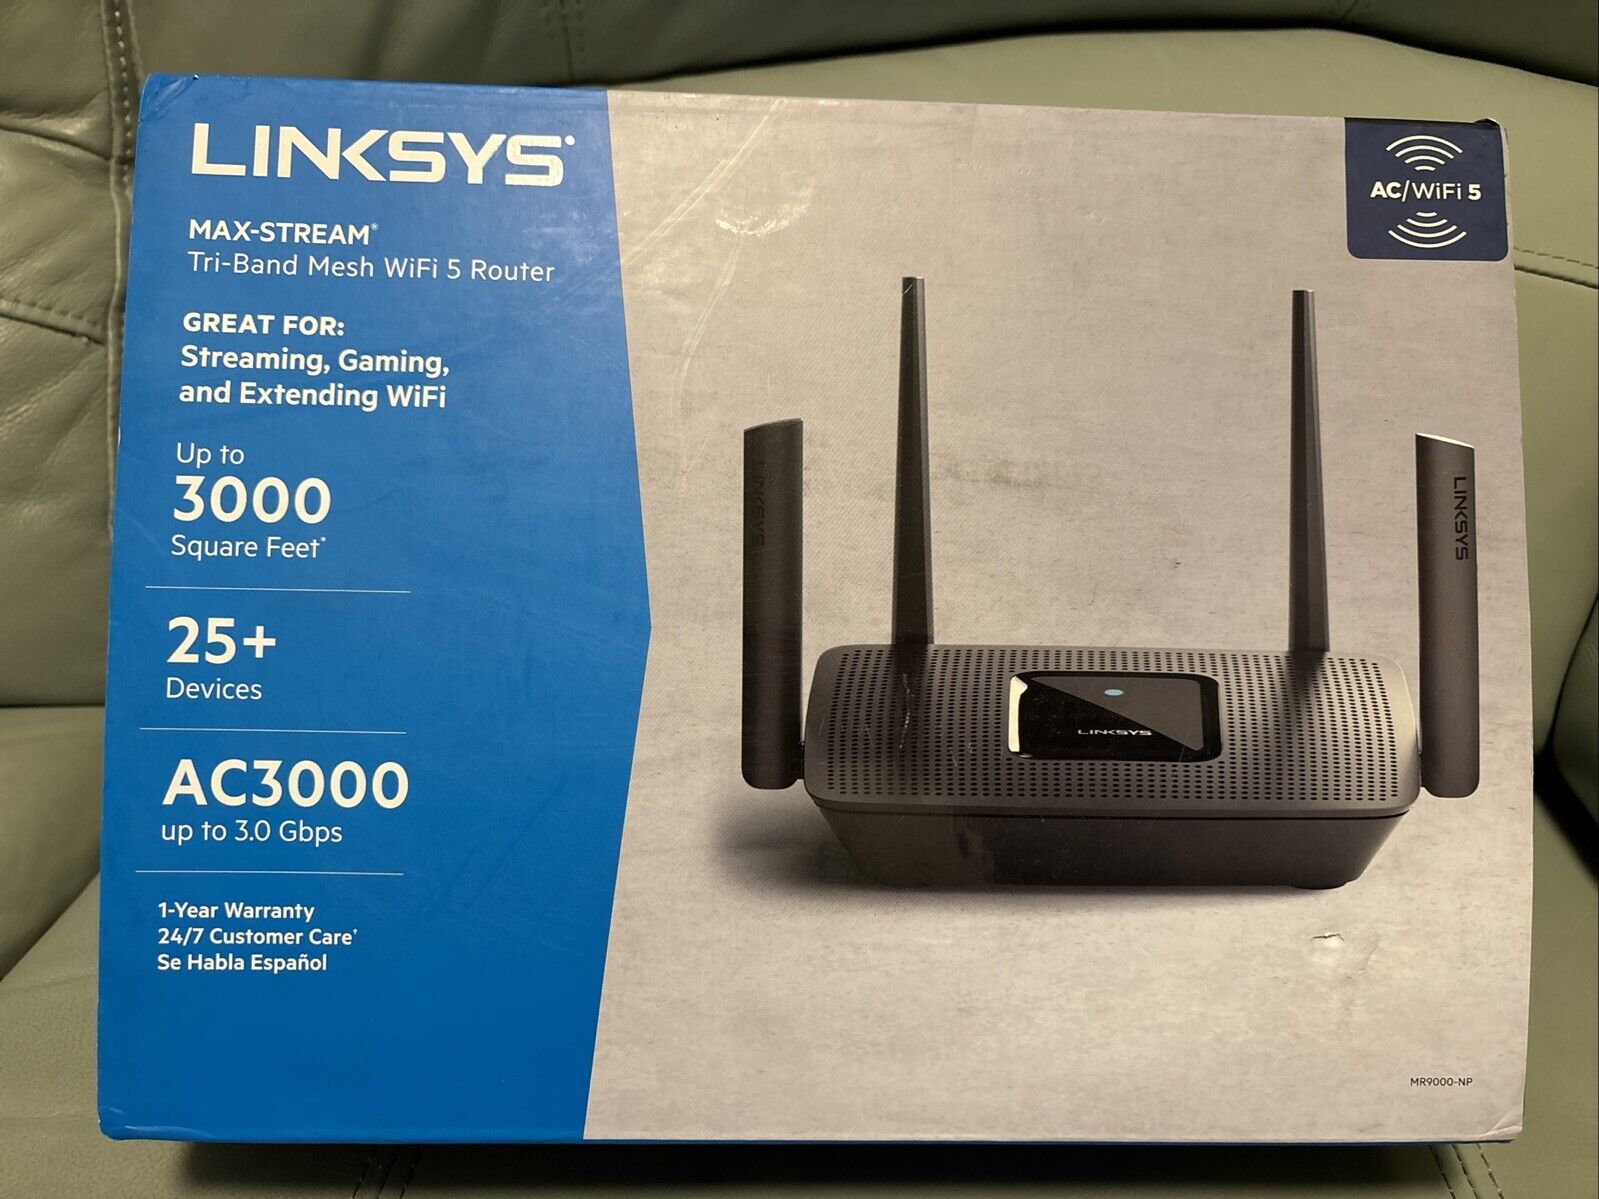 Linksys MR9000-NP Max-Stream Tri-Band AC3000Wi-Fi 5 Router